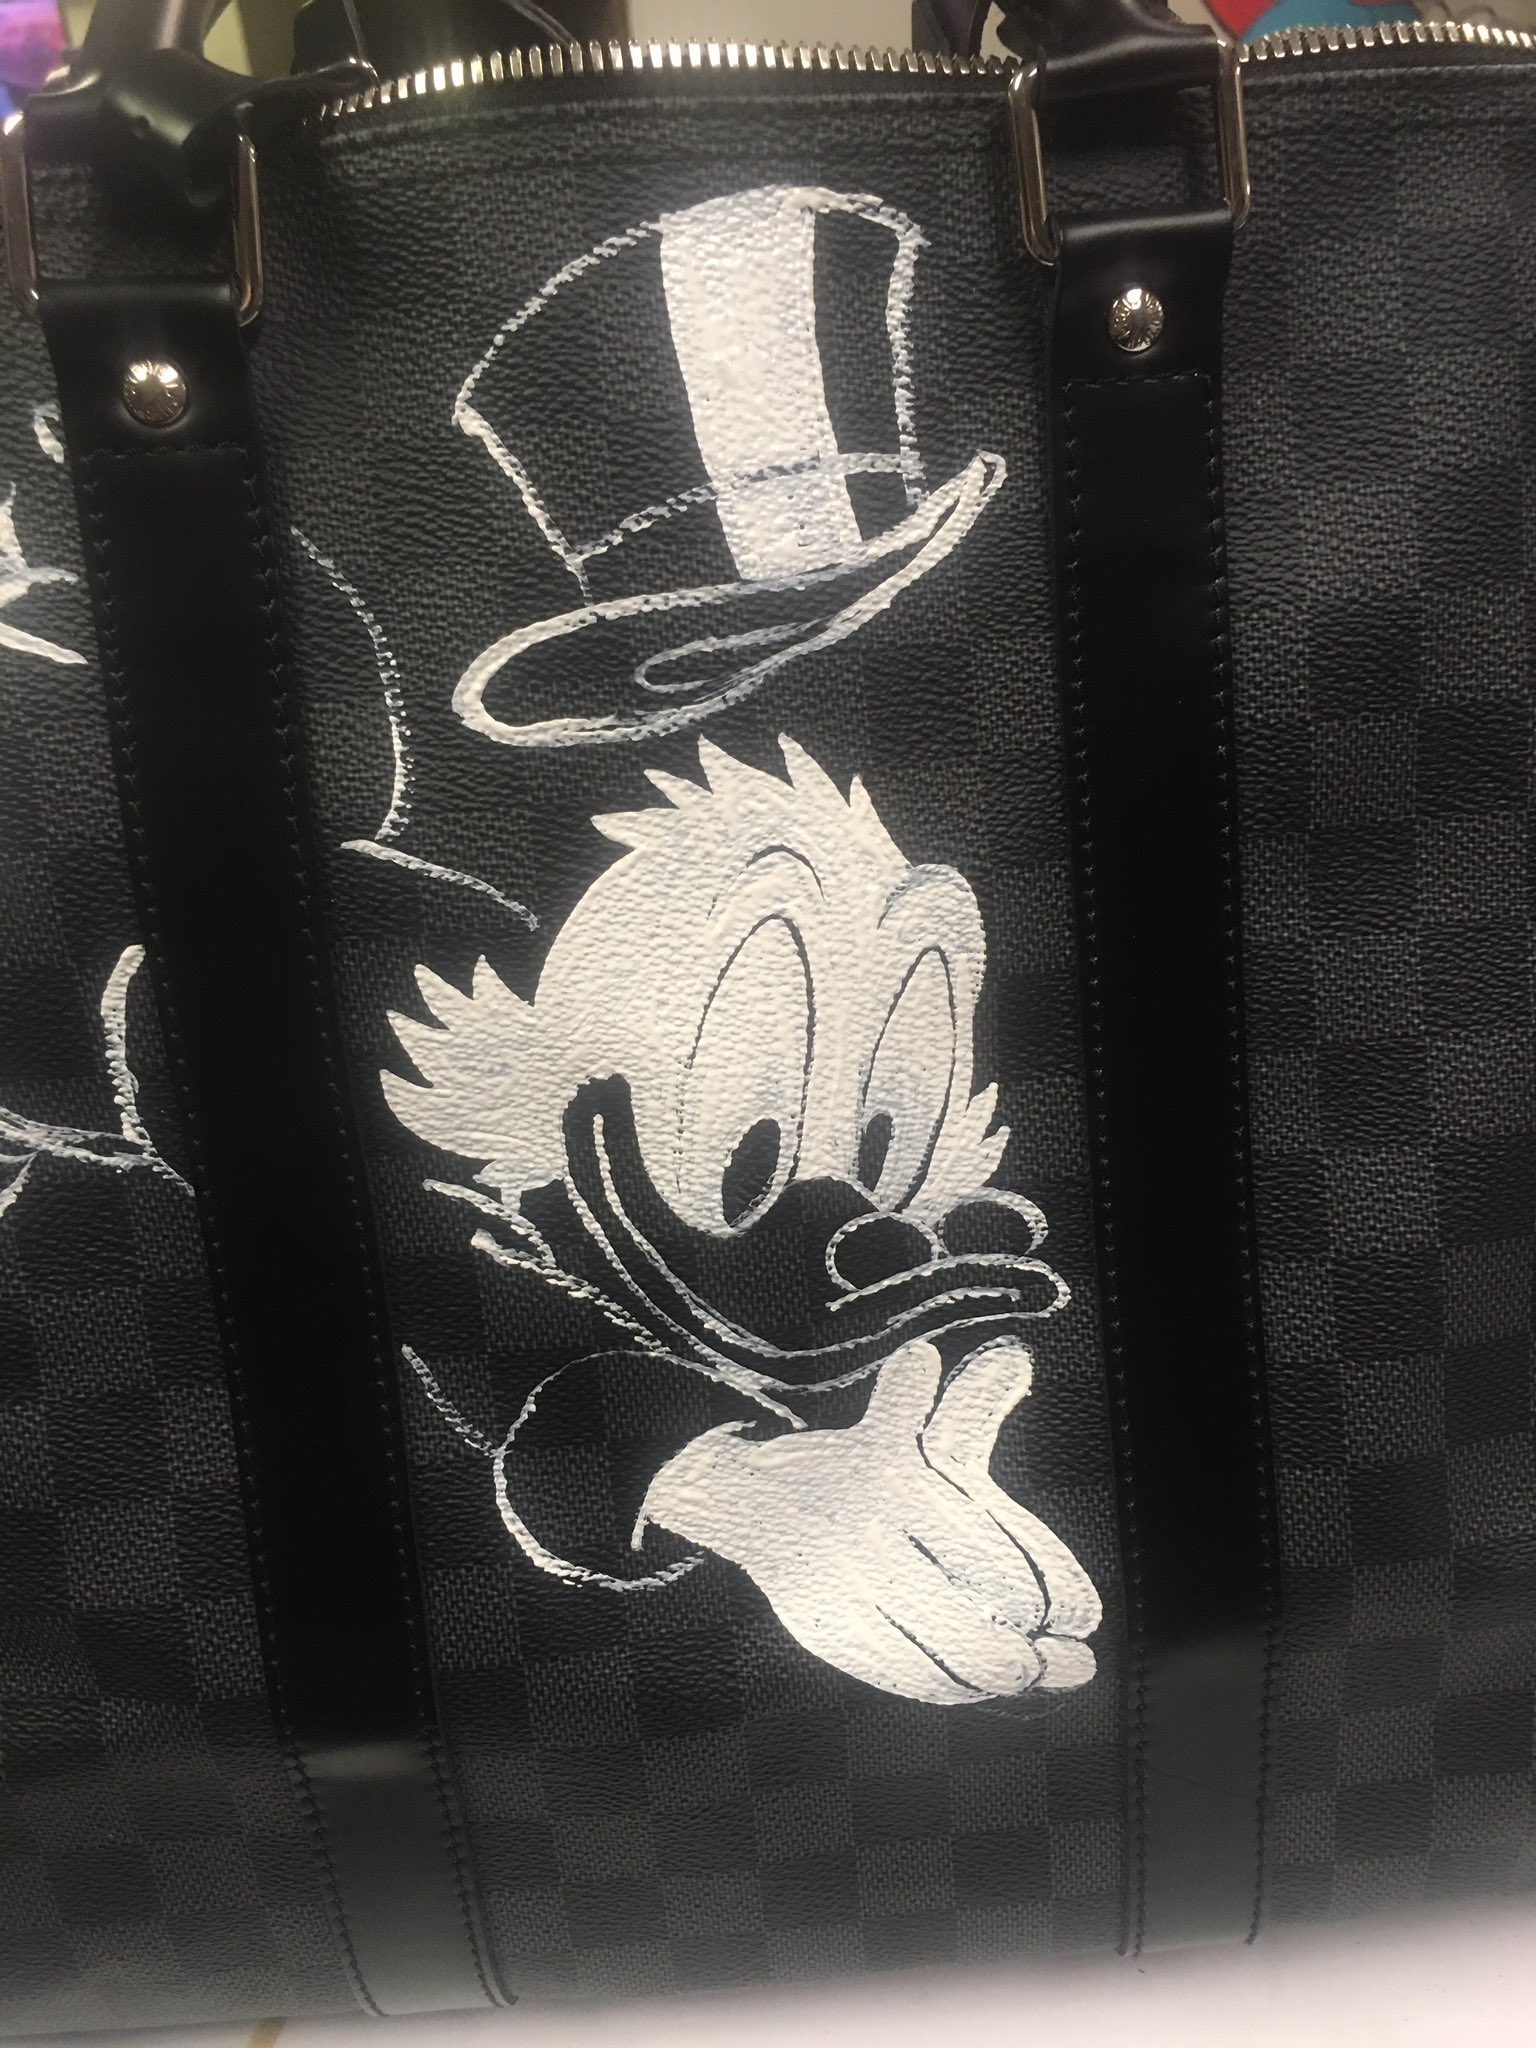 Mike Mozart AI 🎨 Artist MiMo on X: One of my hand painted Louis Vuitton  Duffle Bags! Here with Uncle Scrooge McDuck! You can see more of my MiMo,  Mike Mozart paintings